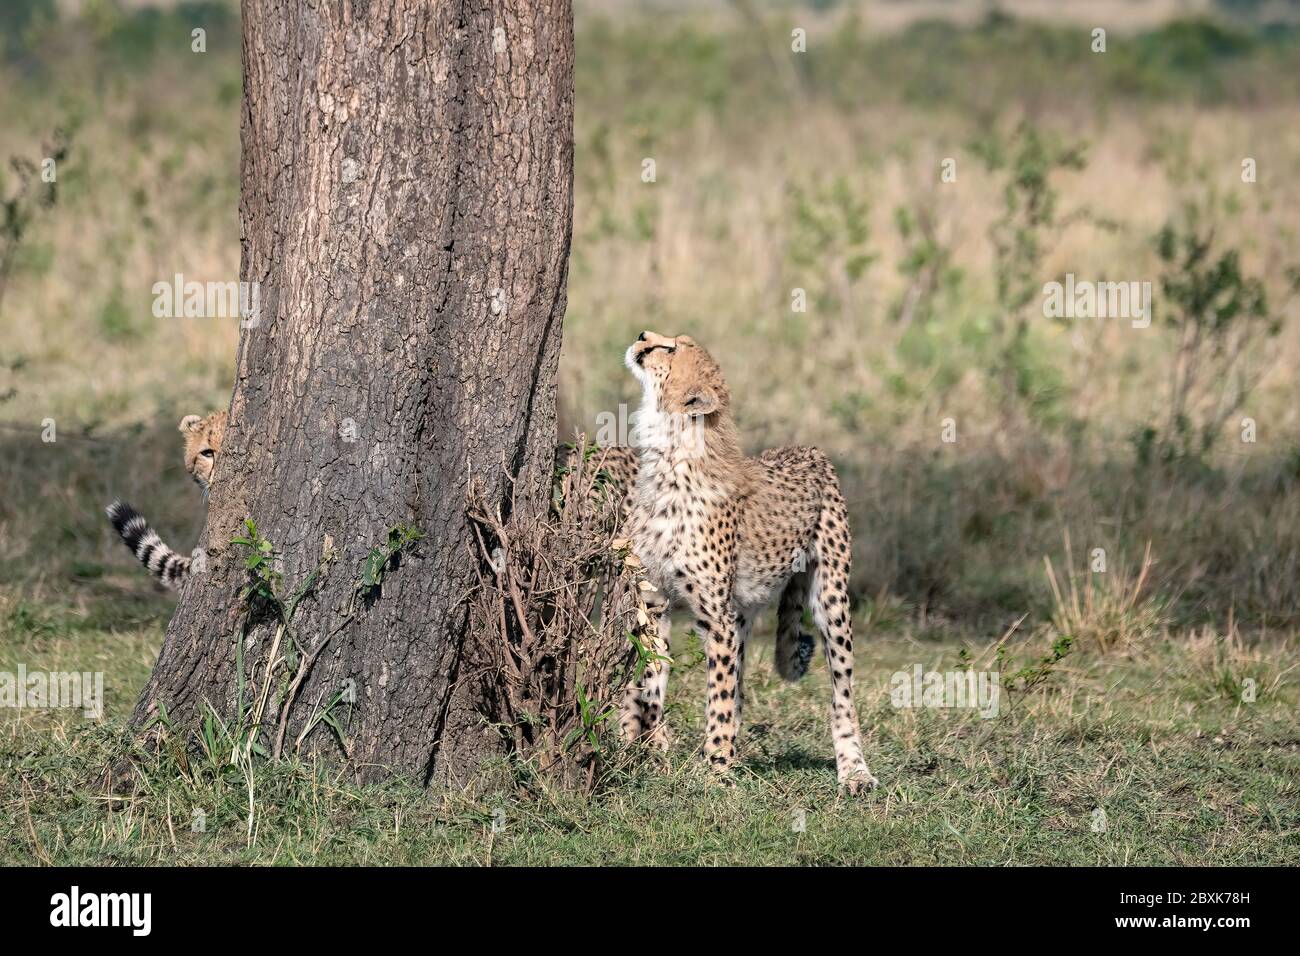 Young cheetah looking up into a tree while another cheetah peeks around the trunk. Image taken in the Maasai Mara, Kenya. Stock Photo